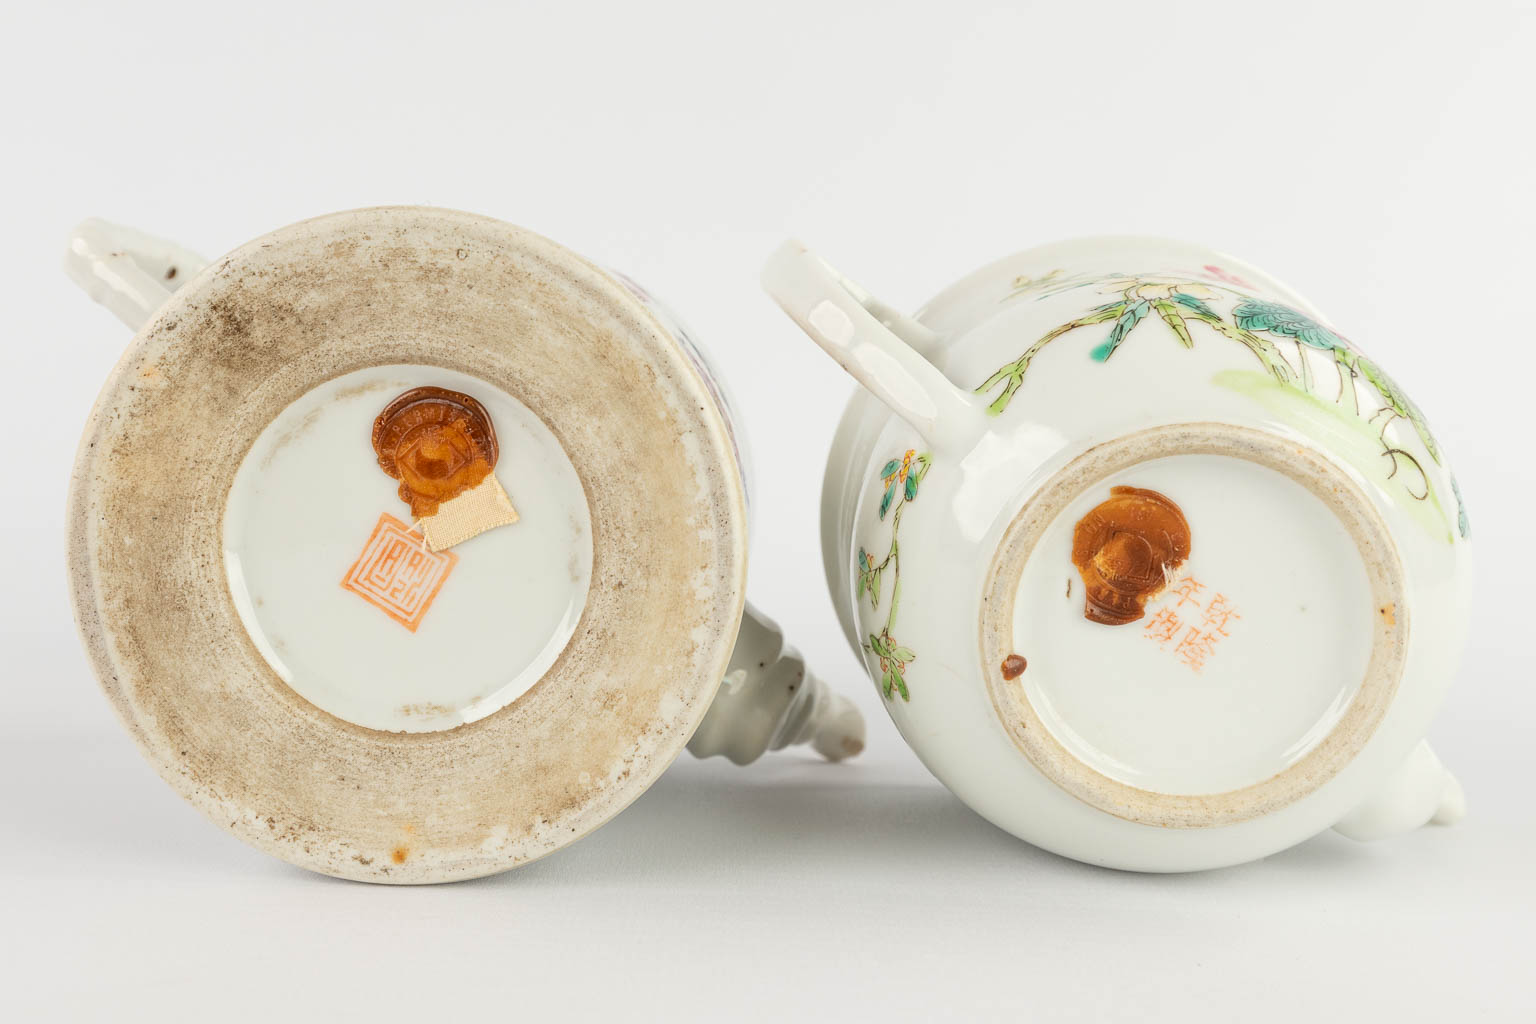 Five pieces of Chinese porcelain, decorated with hand-painted images. 19th/20th C. (H:19 x D:9 cm)